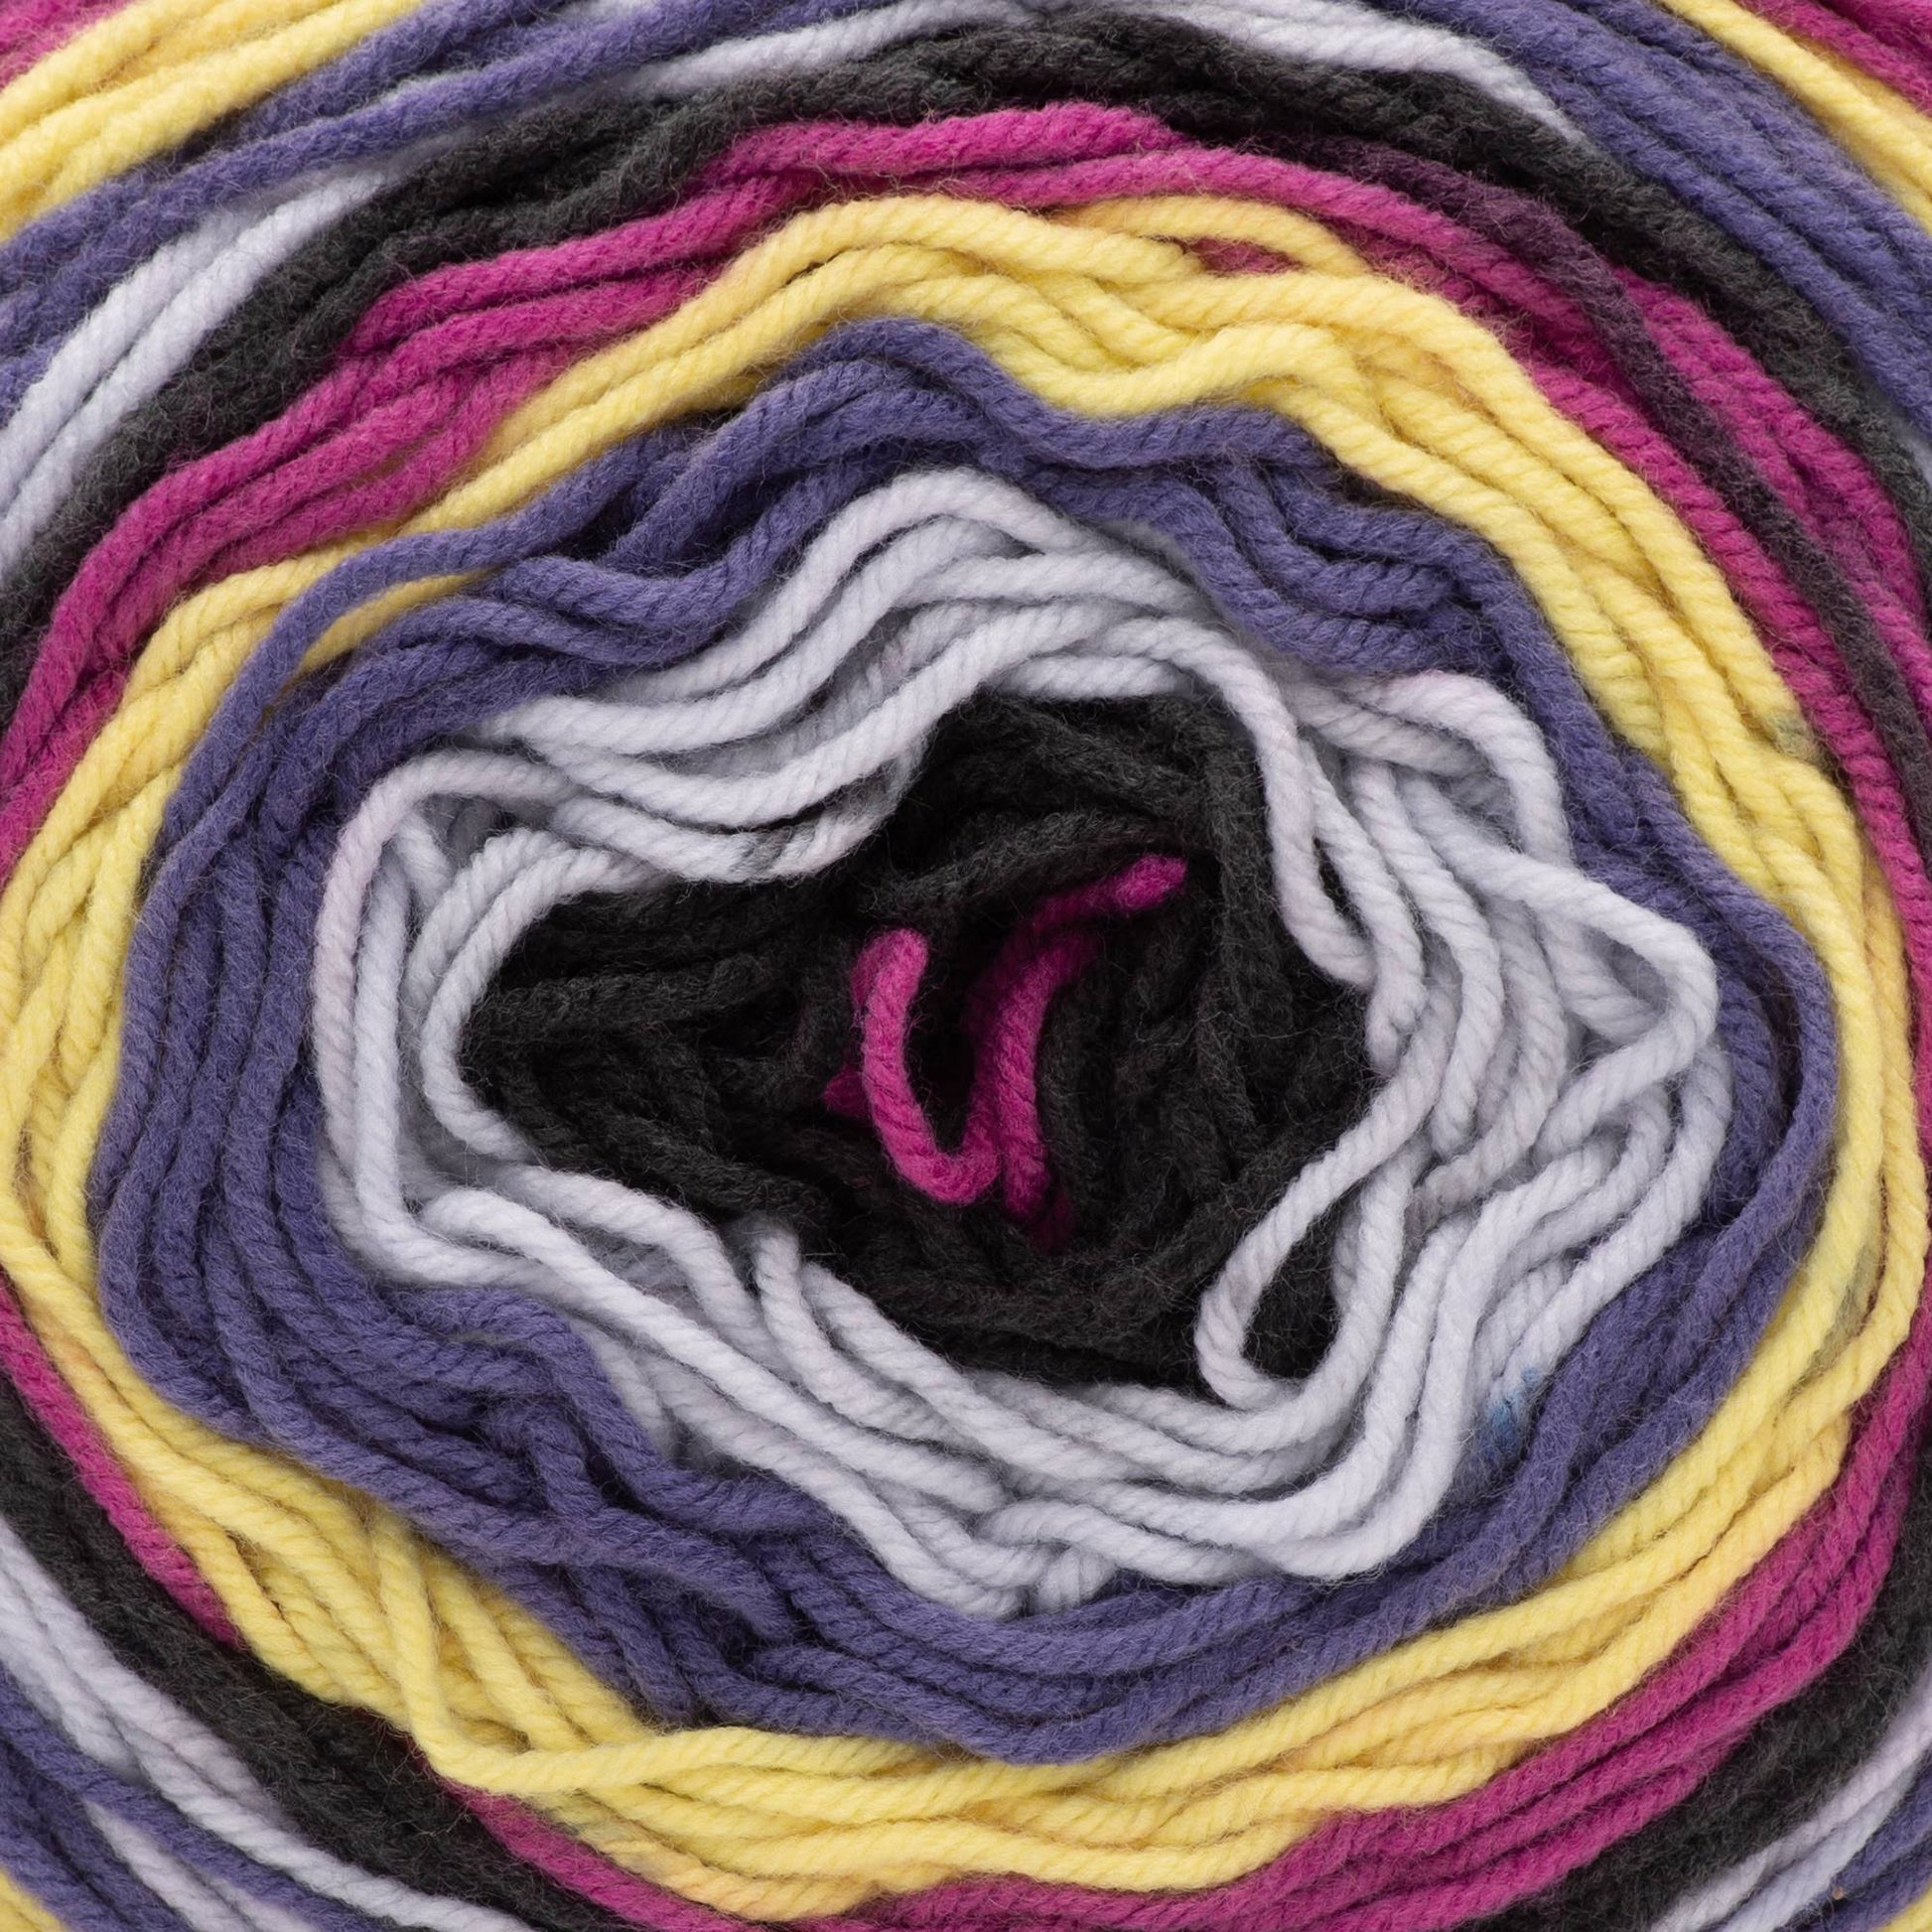 I got three of this caron big cakes in boysenberry. I want make a blanket  for myself using it. Any good pattern anyone can recommend. I'm not a  beginner but not also